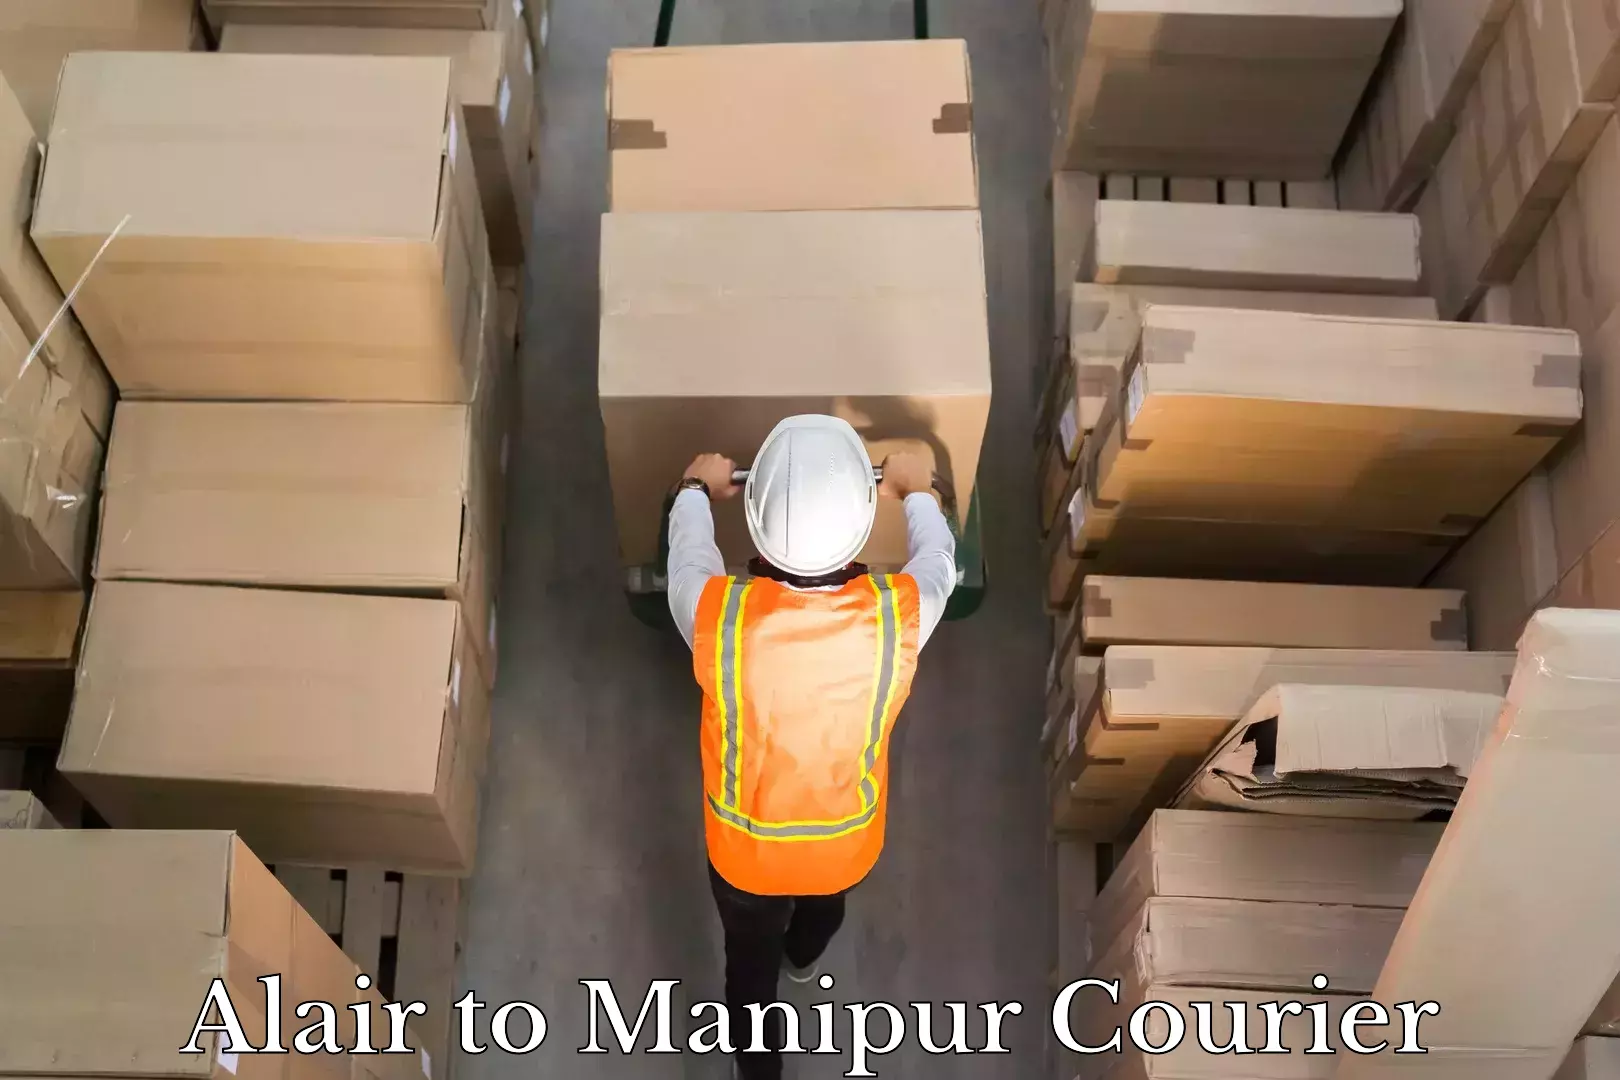 Premium delivery services Alair to Manipur